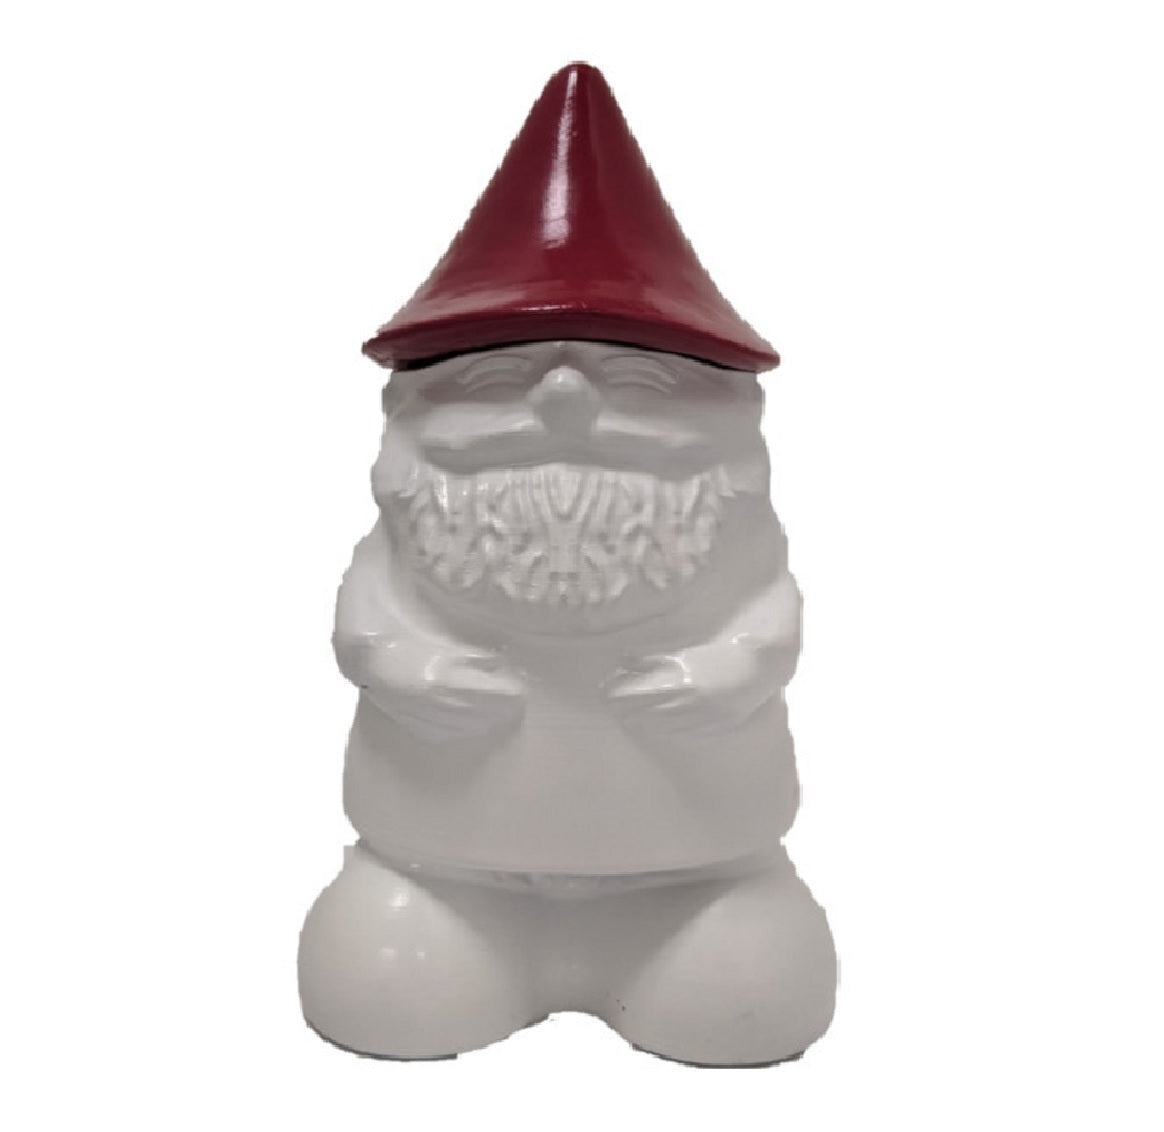 Tiki 1120161 White Ghome with Red Hat Tabletop Torch